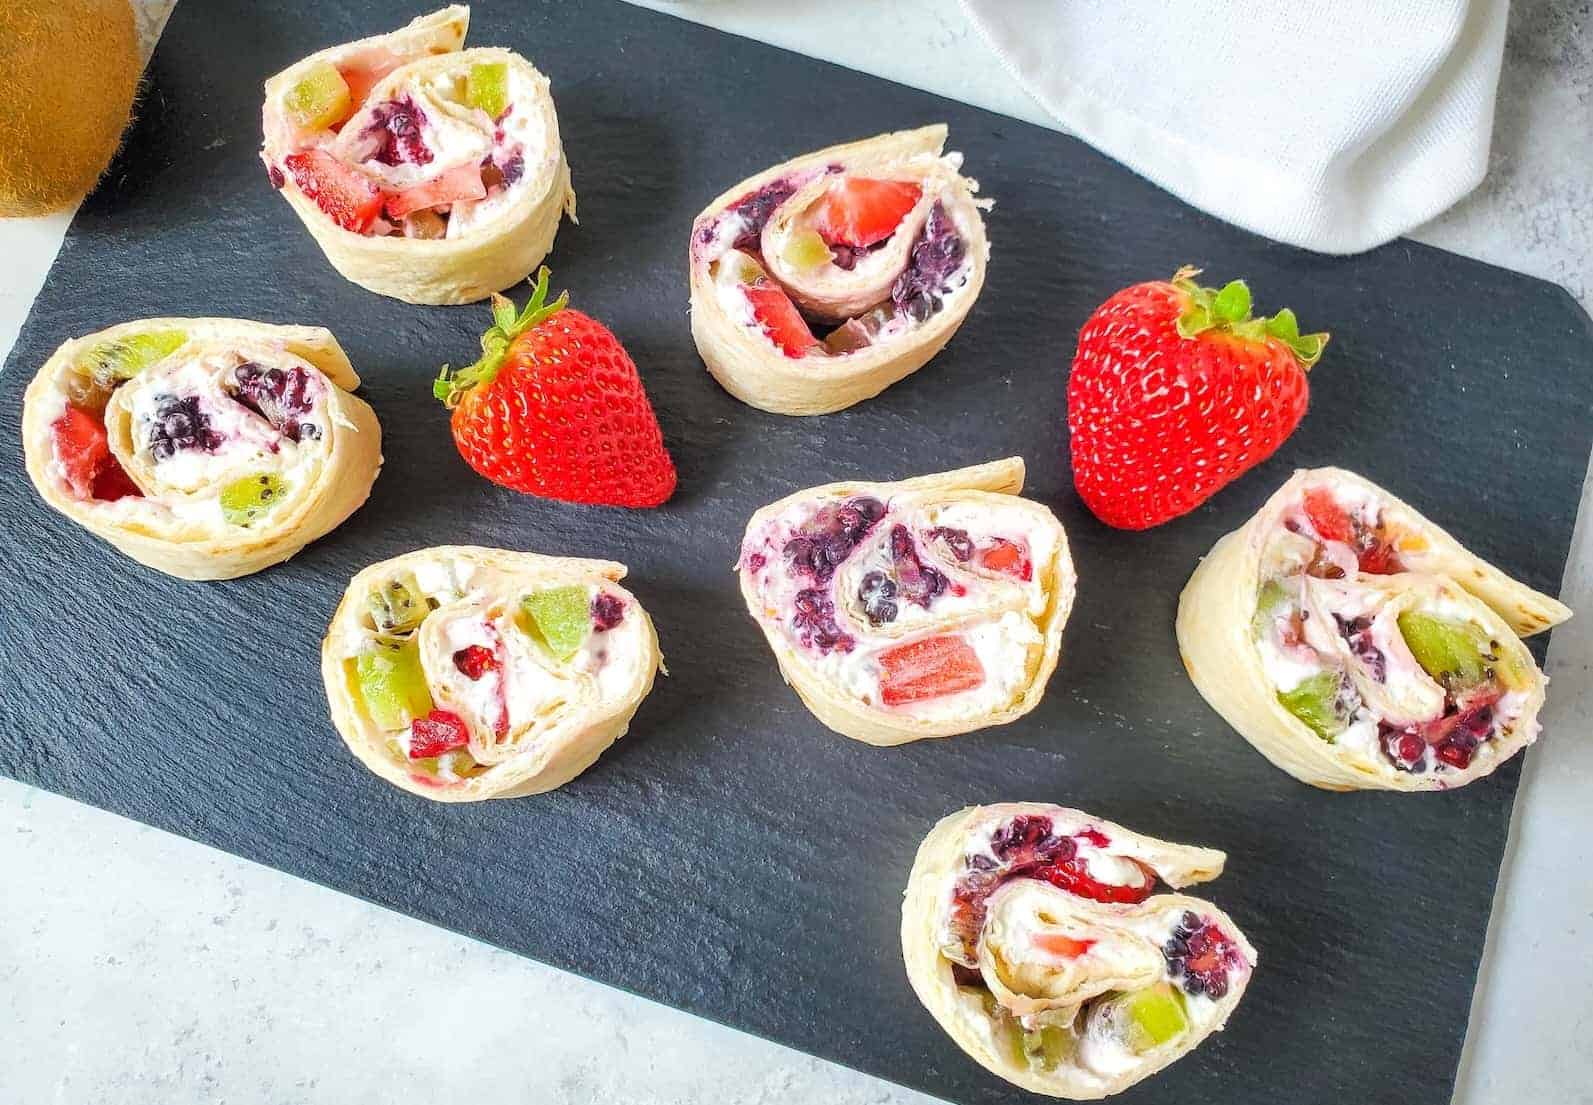 Sliced fruit and cream cheese pinwheel sandwiches arranged on a slate serving board with fresh strawberries.